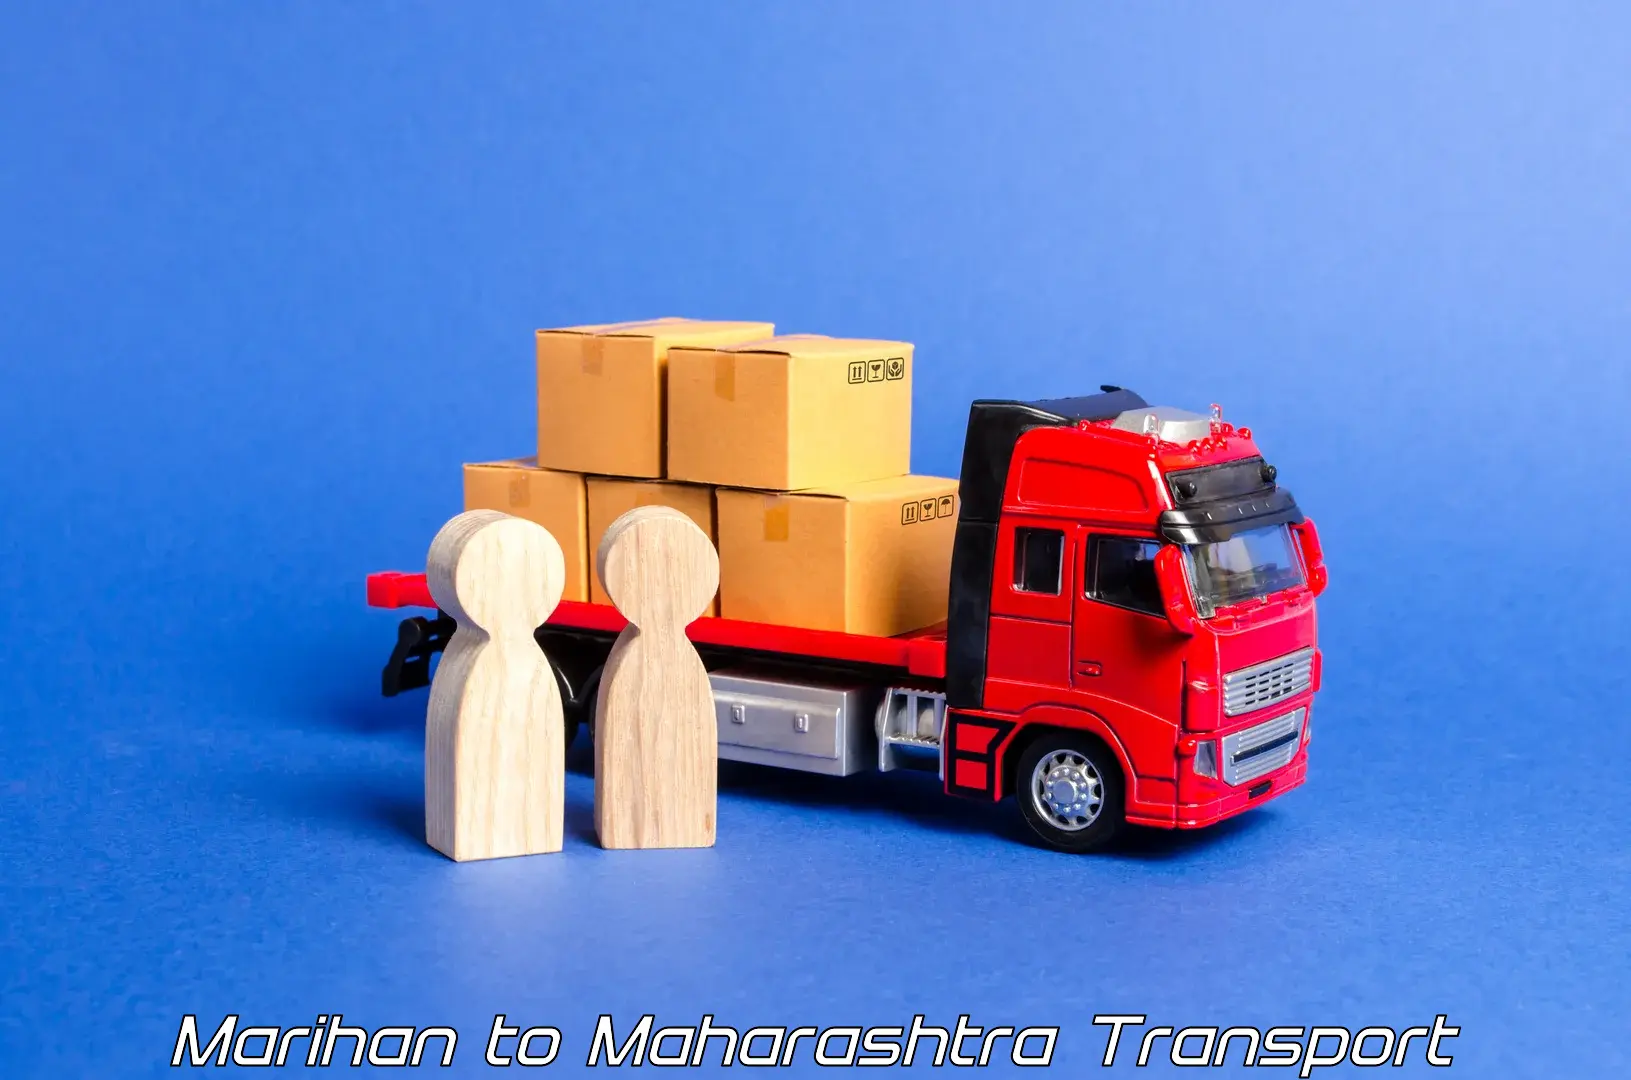 Nationwide transport services Marihan to Tumsar